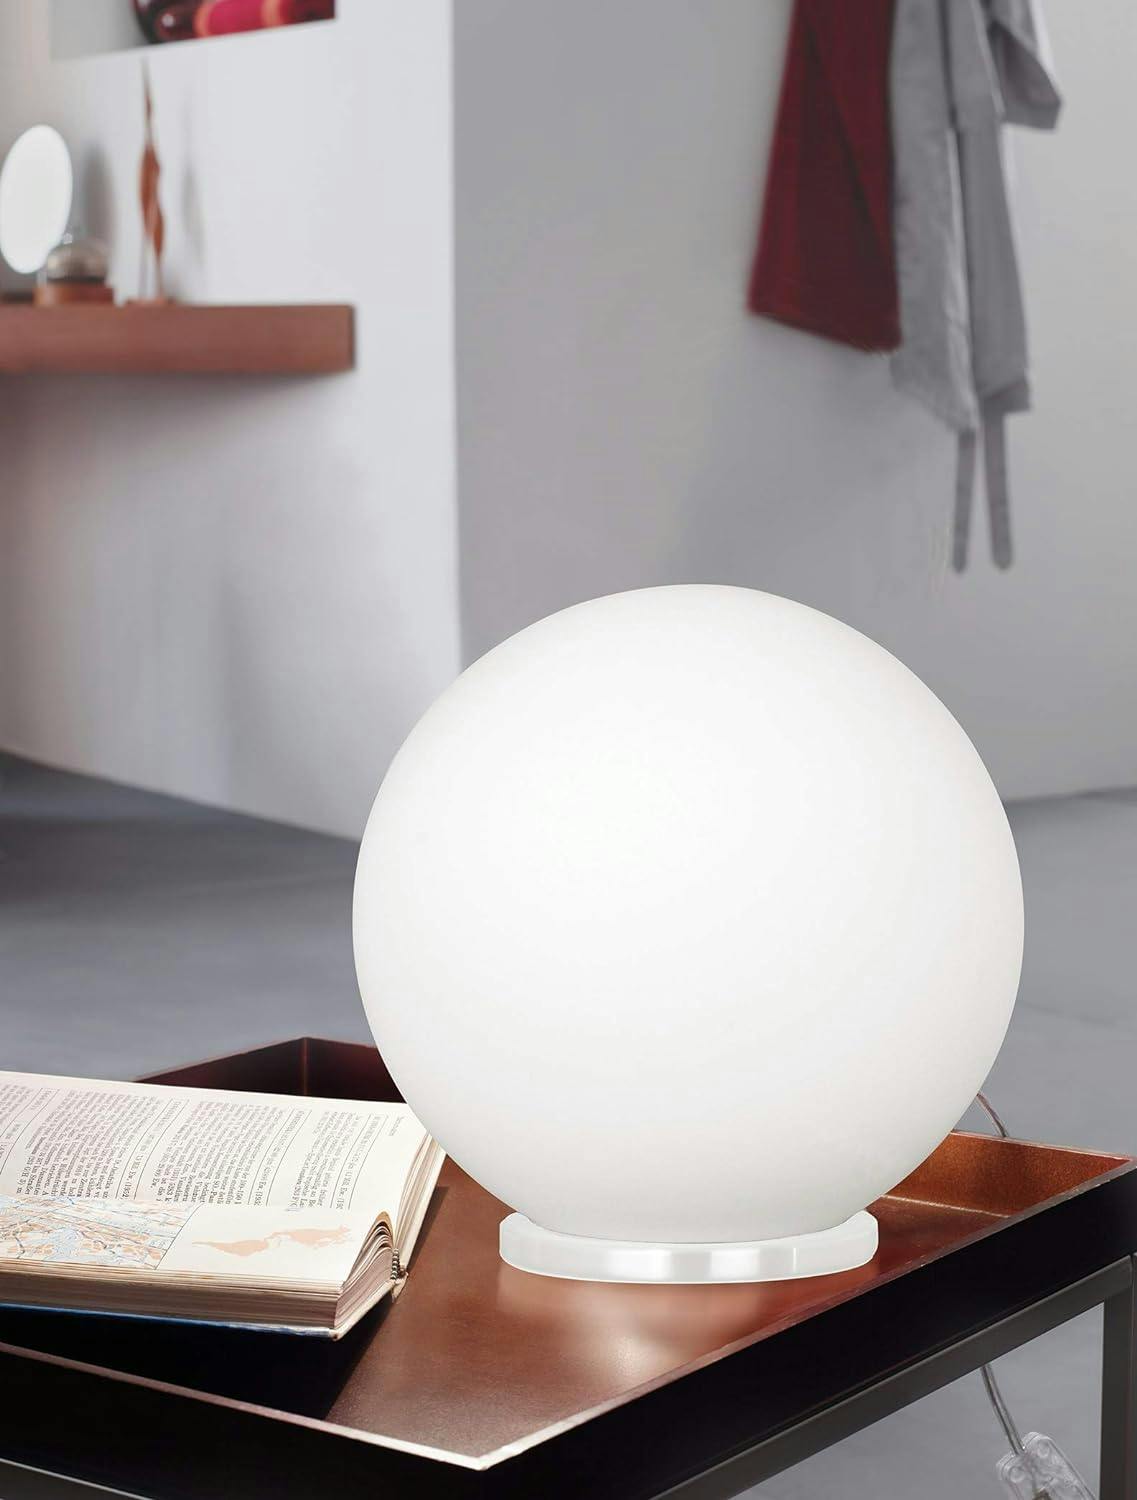 Mia 8" White Metal Globe Table Lamp with Frosted Glass Shade